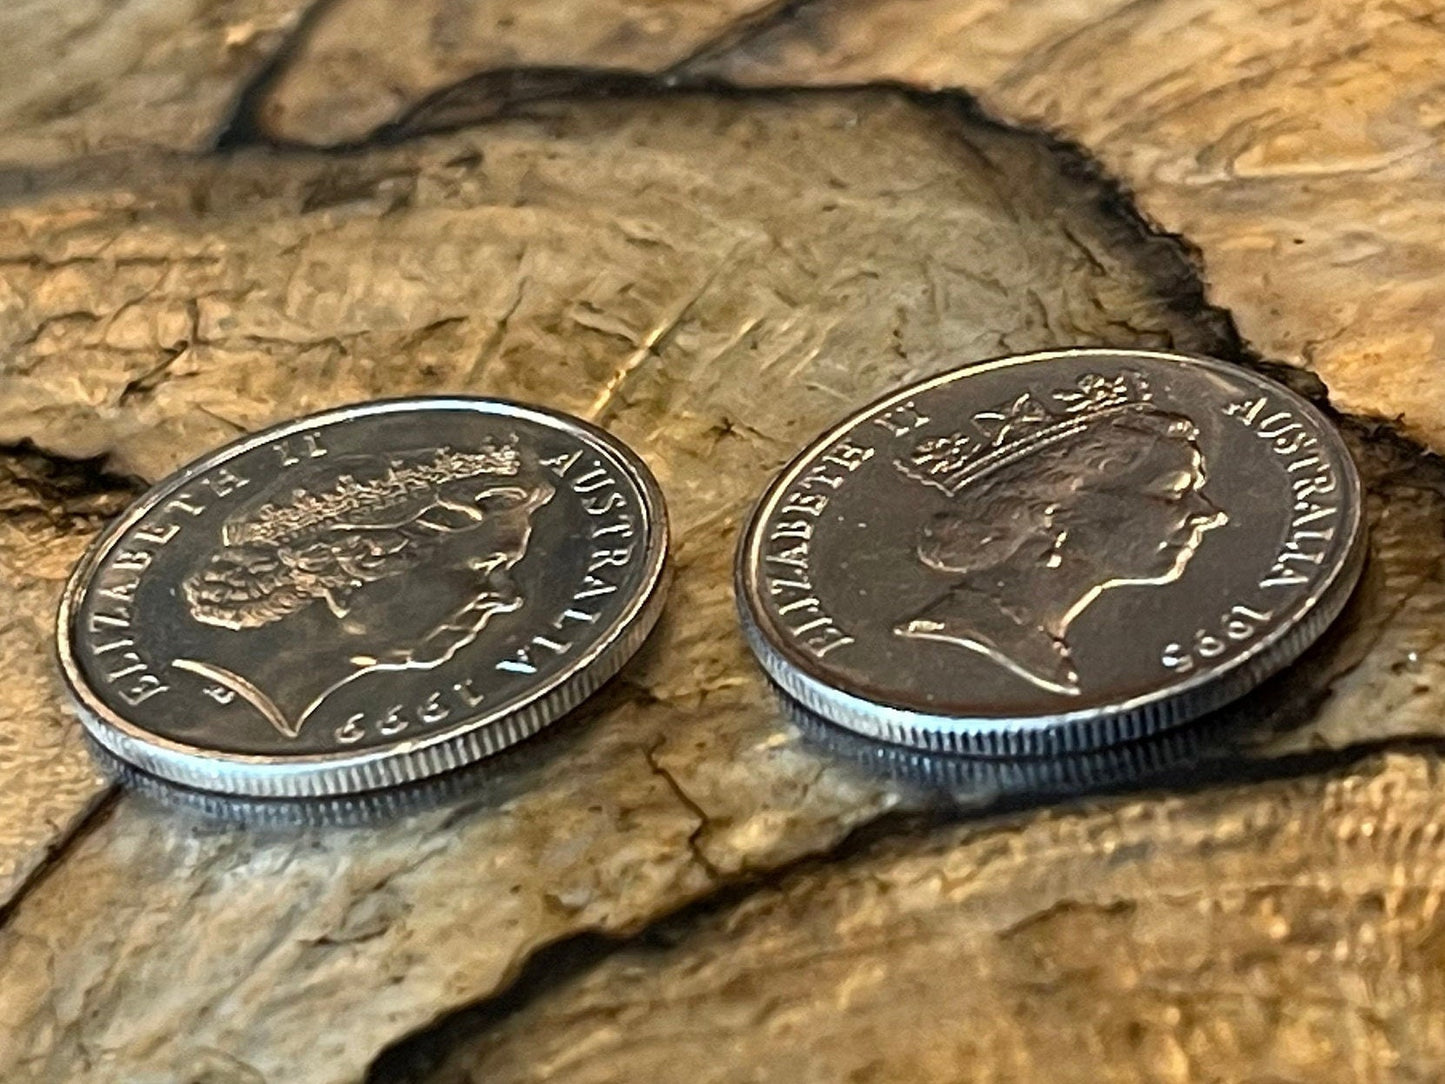 Spiny Anteater 5 Cents Australia Authentic Coin Money for Jewelry and Craft Making (Echidna) 2017